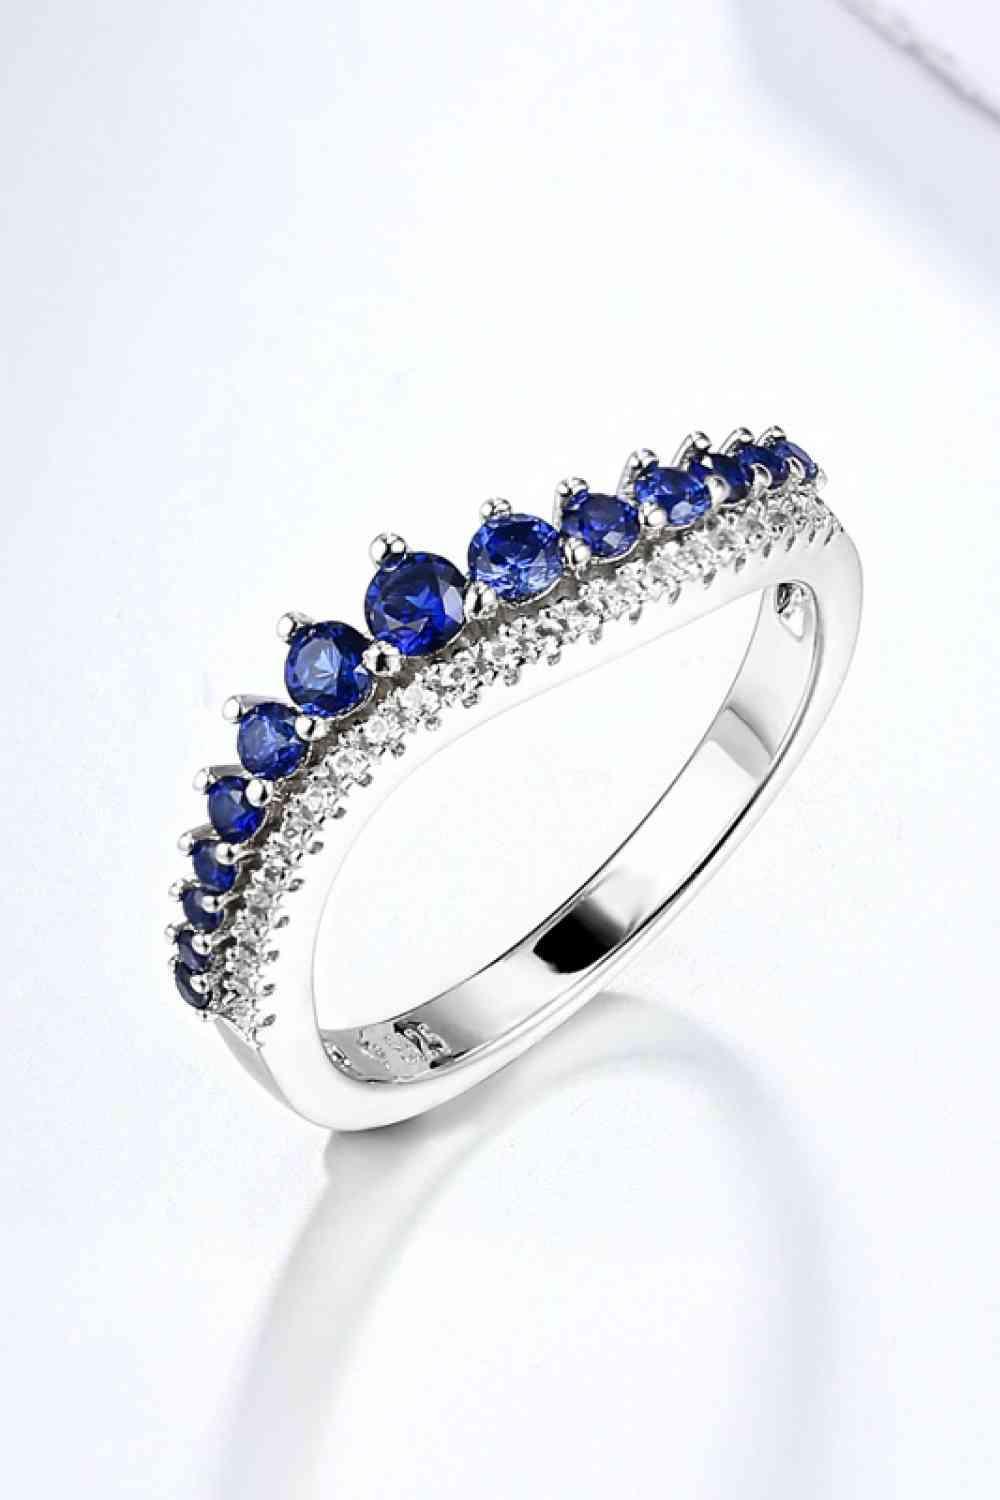 Gleaming 925 Sterling Silver Lab Grown Sapphire Ring-MXSTUDIO.COM